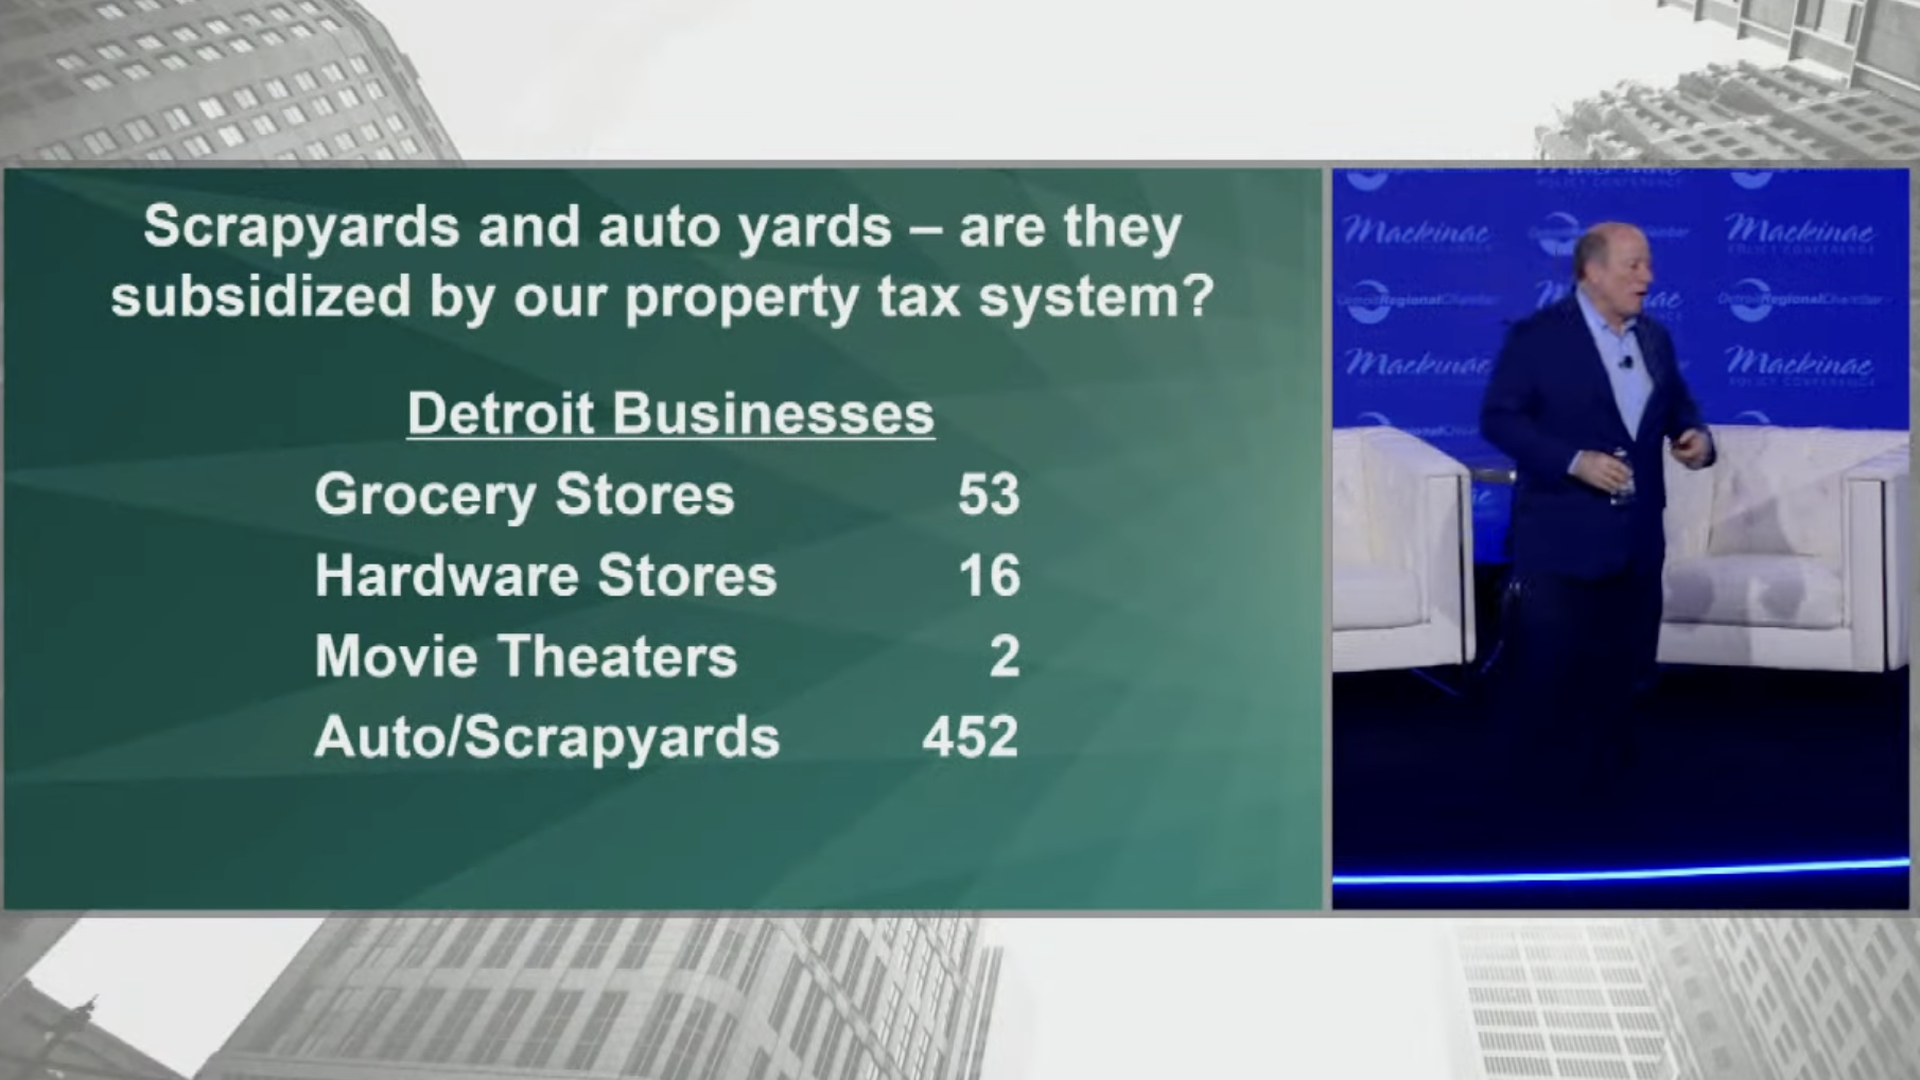 Mayor Duggan showed stats on Detroit businesses as he revealed a sweeping new tax proposal during his keynote address at the Mackinac Policy Conference on Wednesday, May 31. 